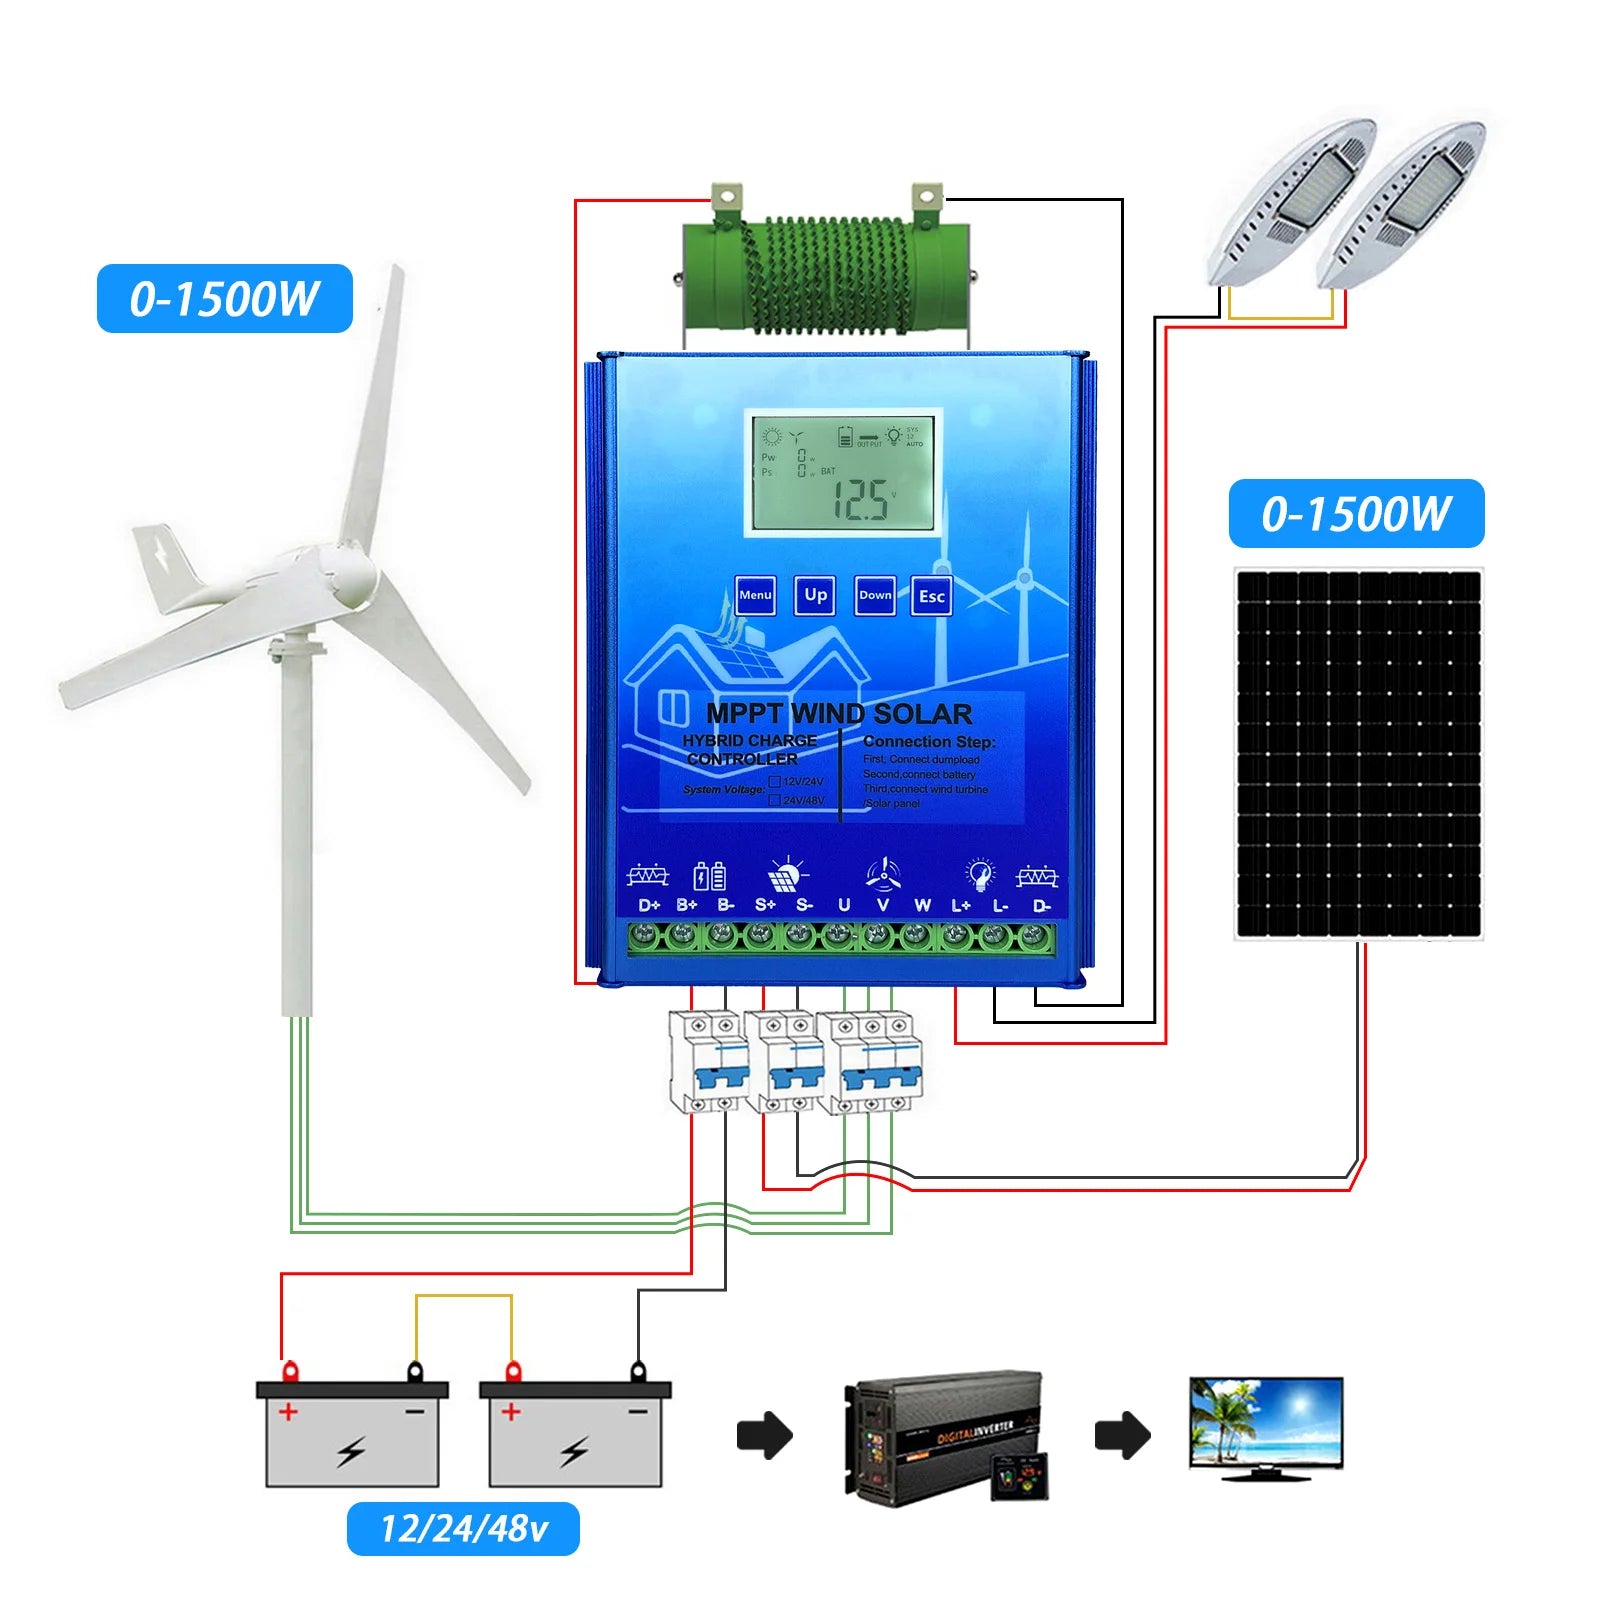 3000W MPPT Hybrid Solar Wind Charge Controller, Controller for hybrid solar-wind charging system, supports multiple battery types, and features WiFi connectivity.